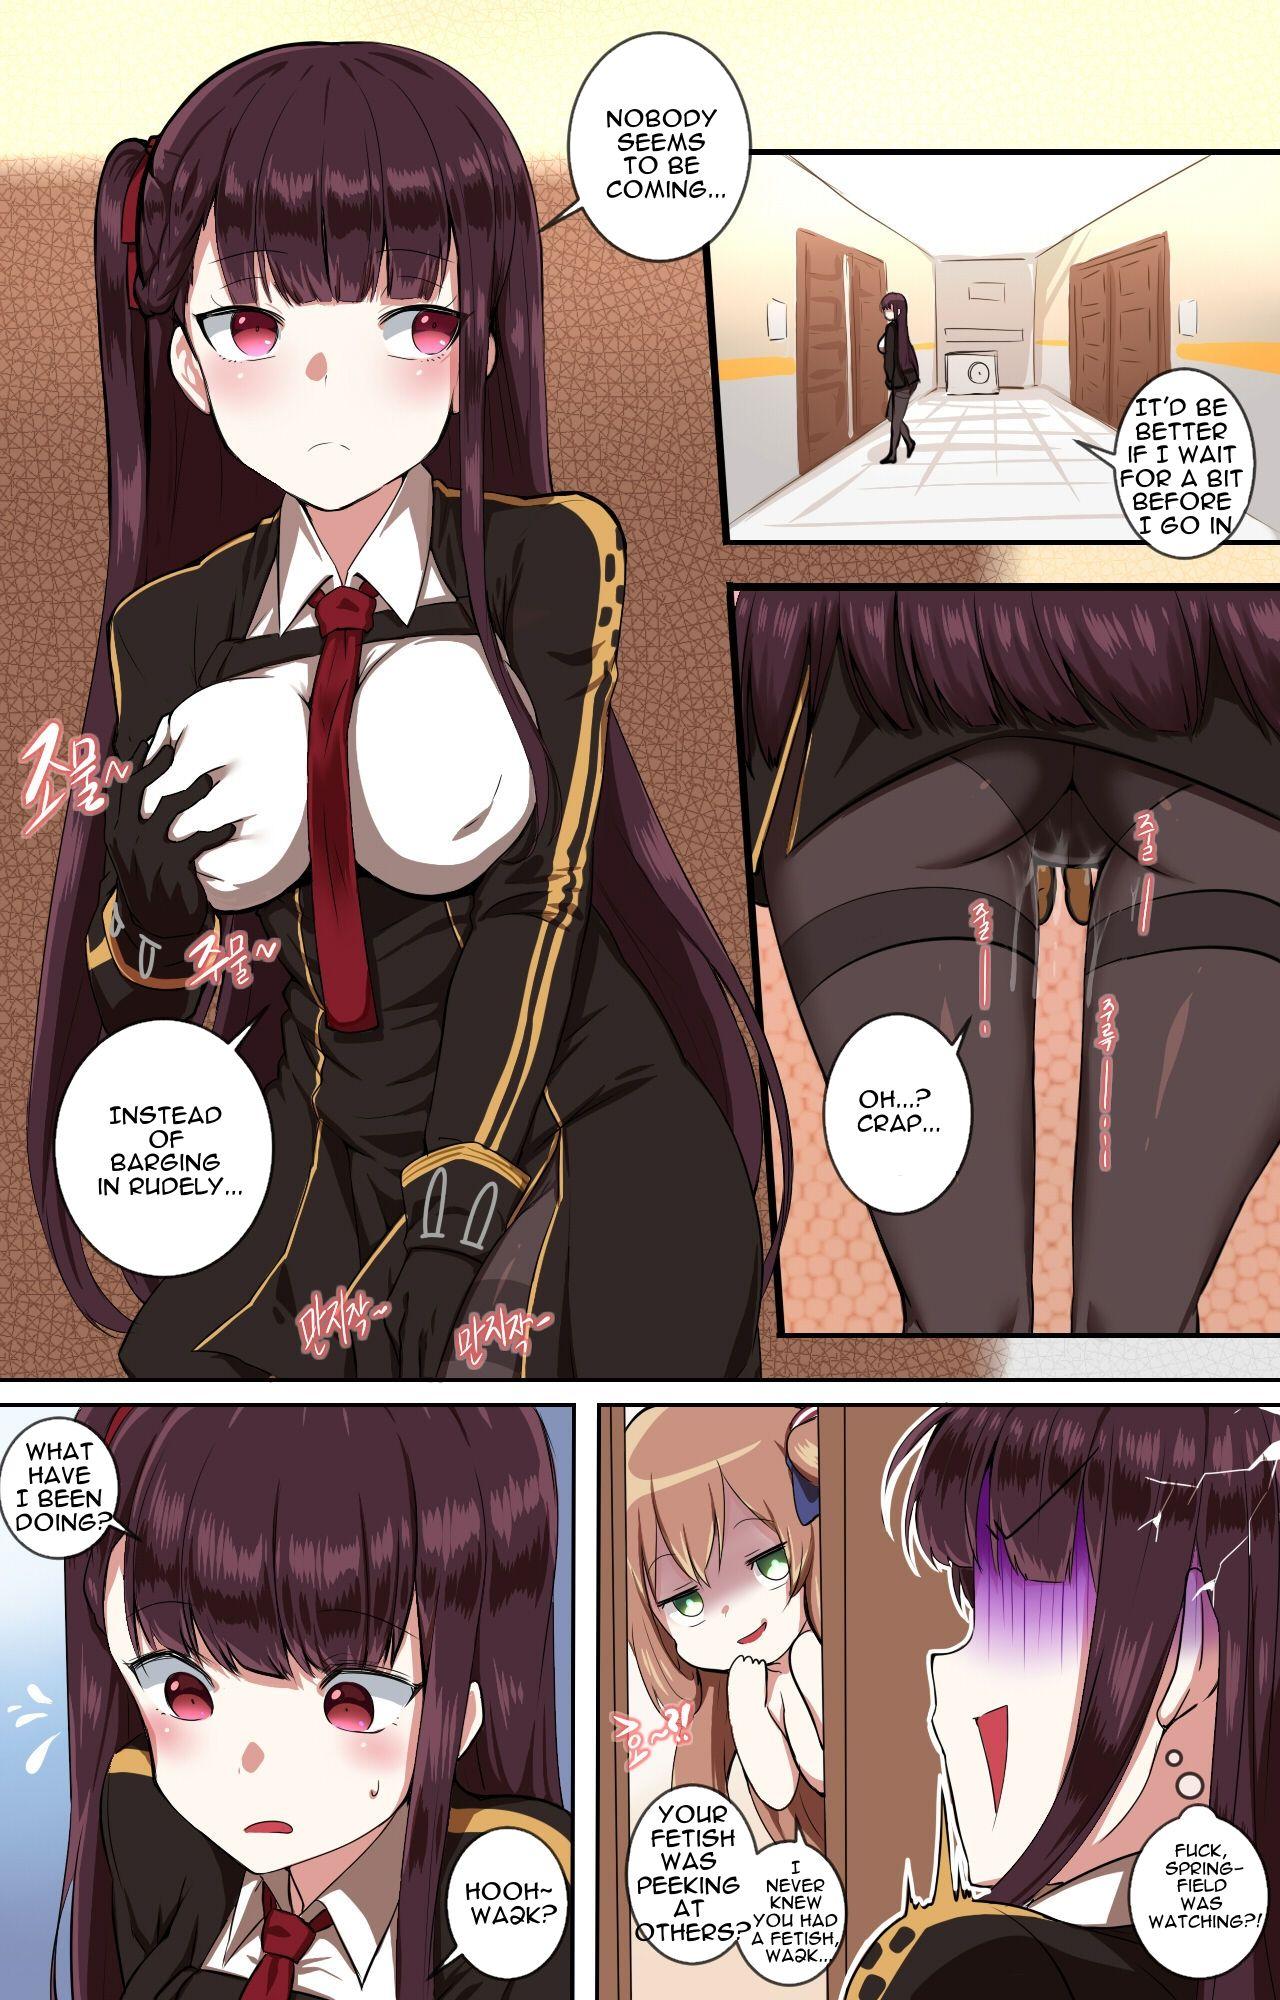 Homo How to use dolls 02 - Girls frontline Cruising - Page 4